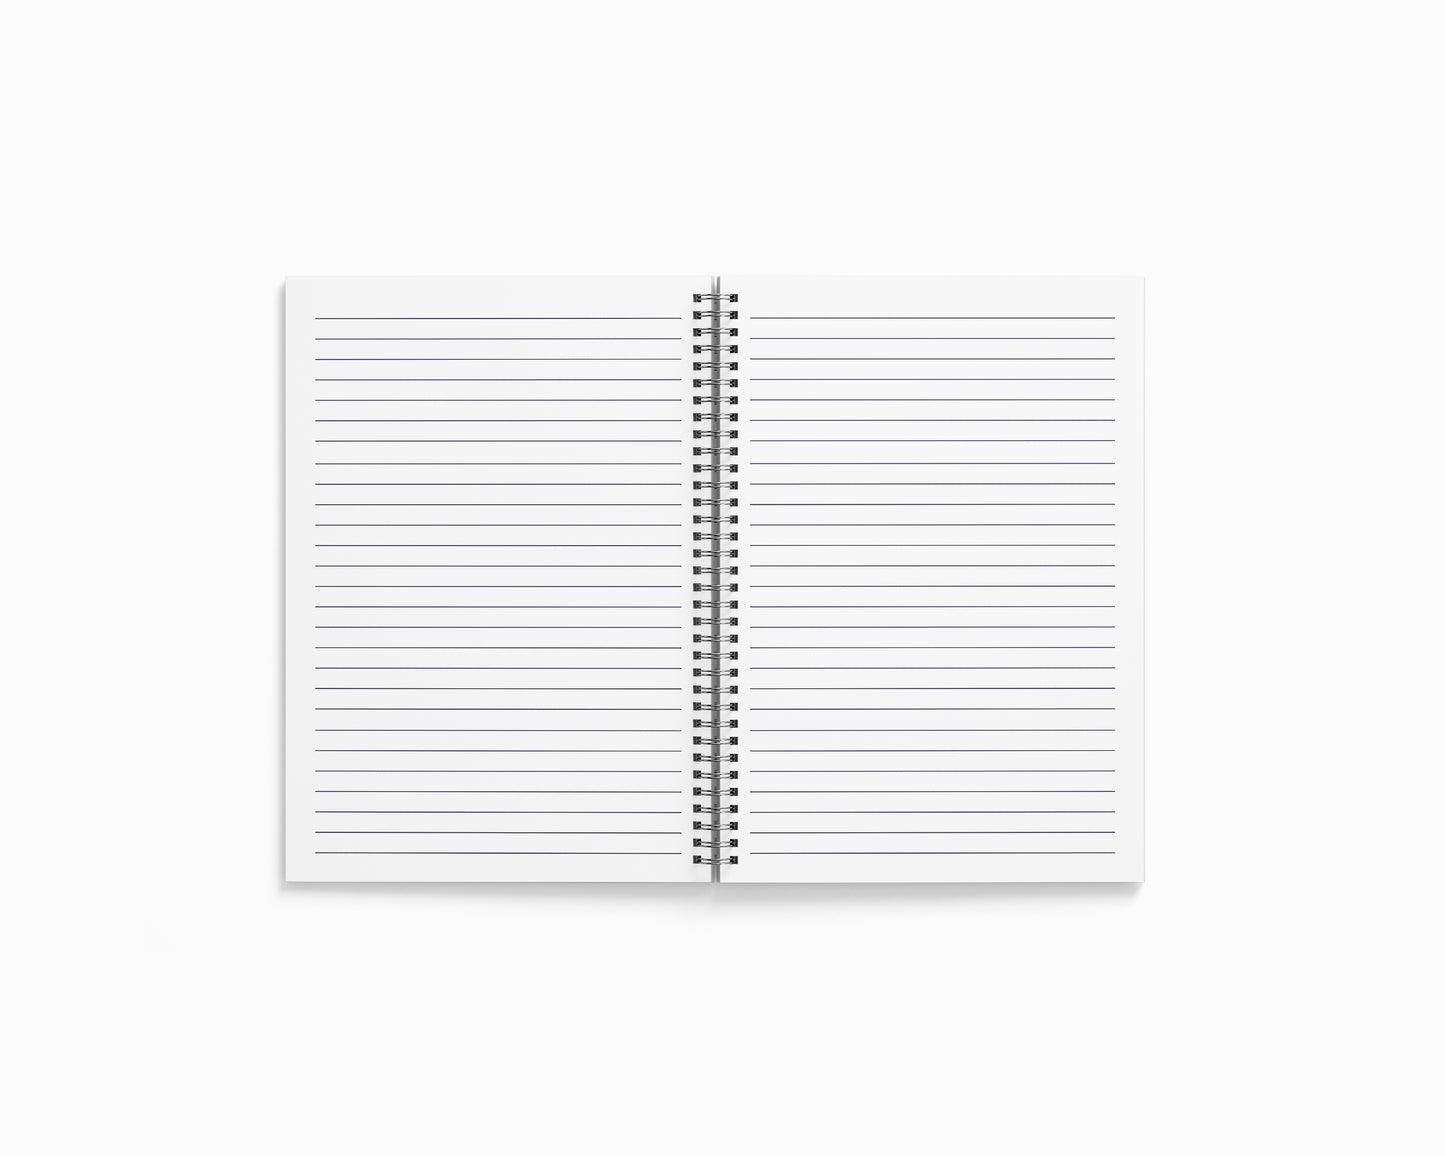 Aantaliya Notebook (A5 Size, 100 Pages, Ruled)